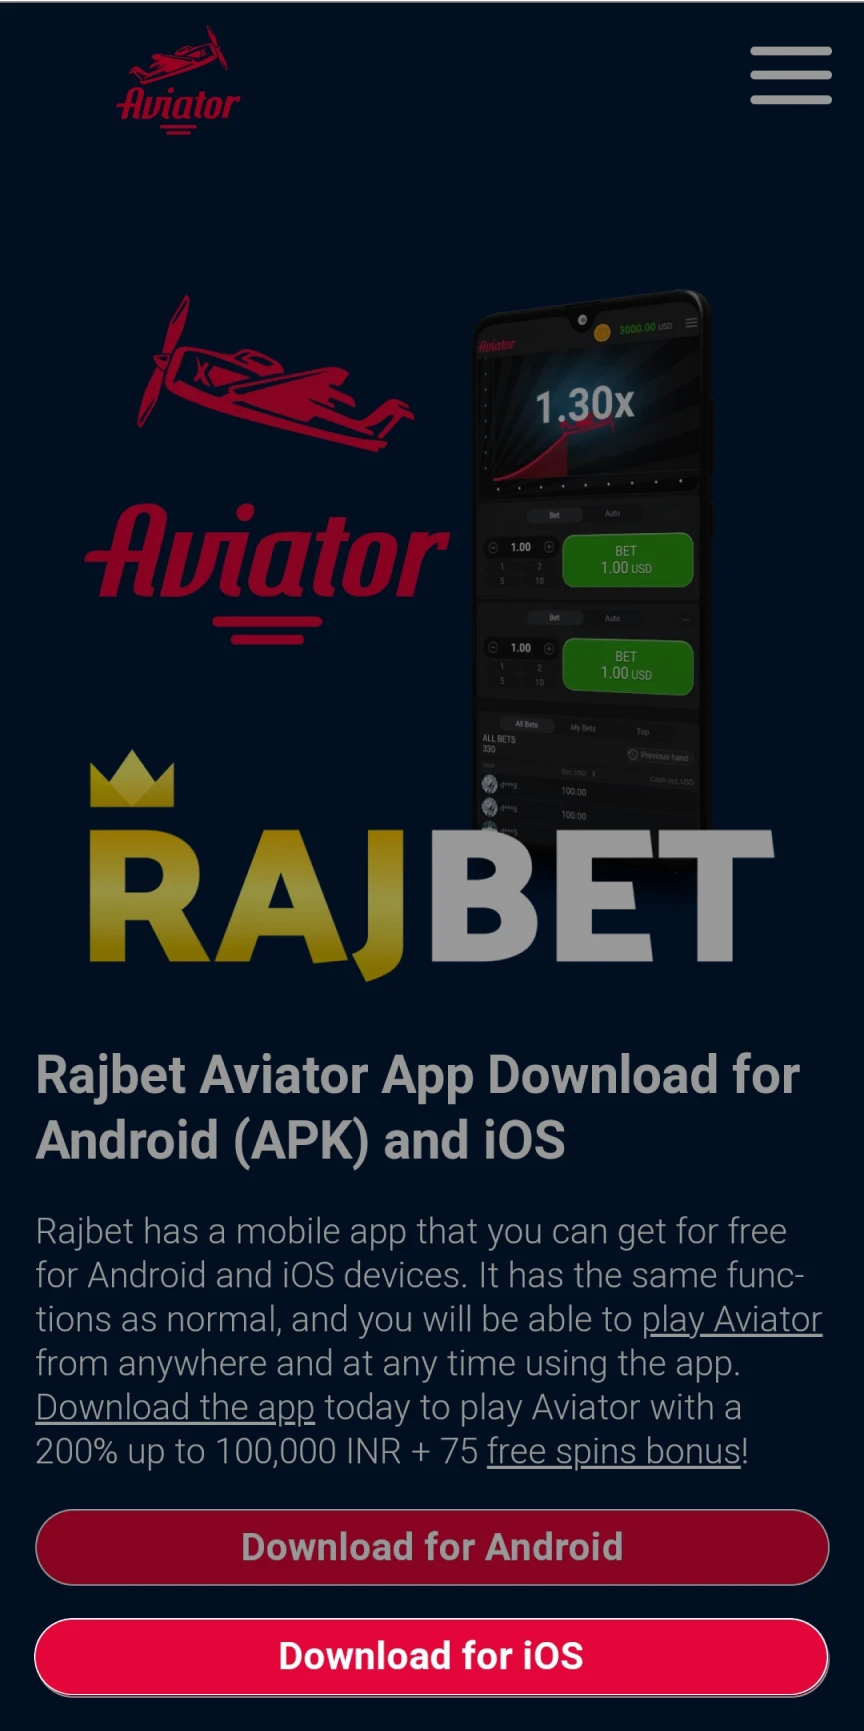 Go to the Rajbet homepage to download the app for iOS.